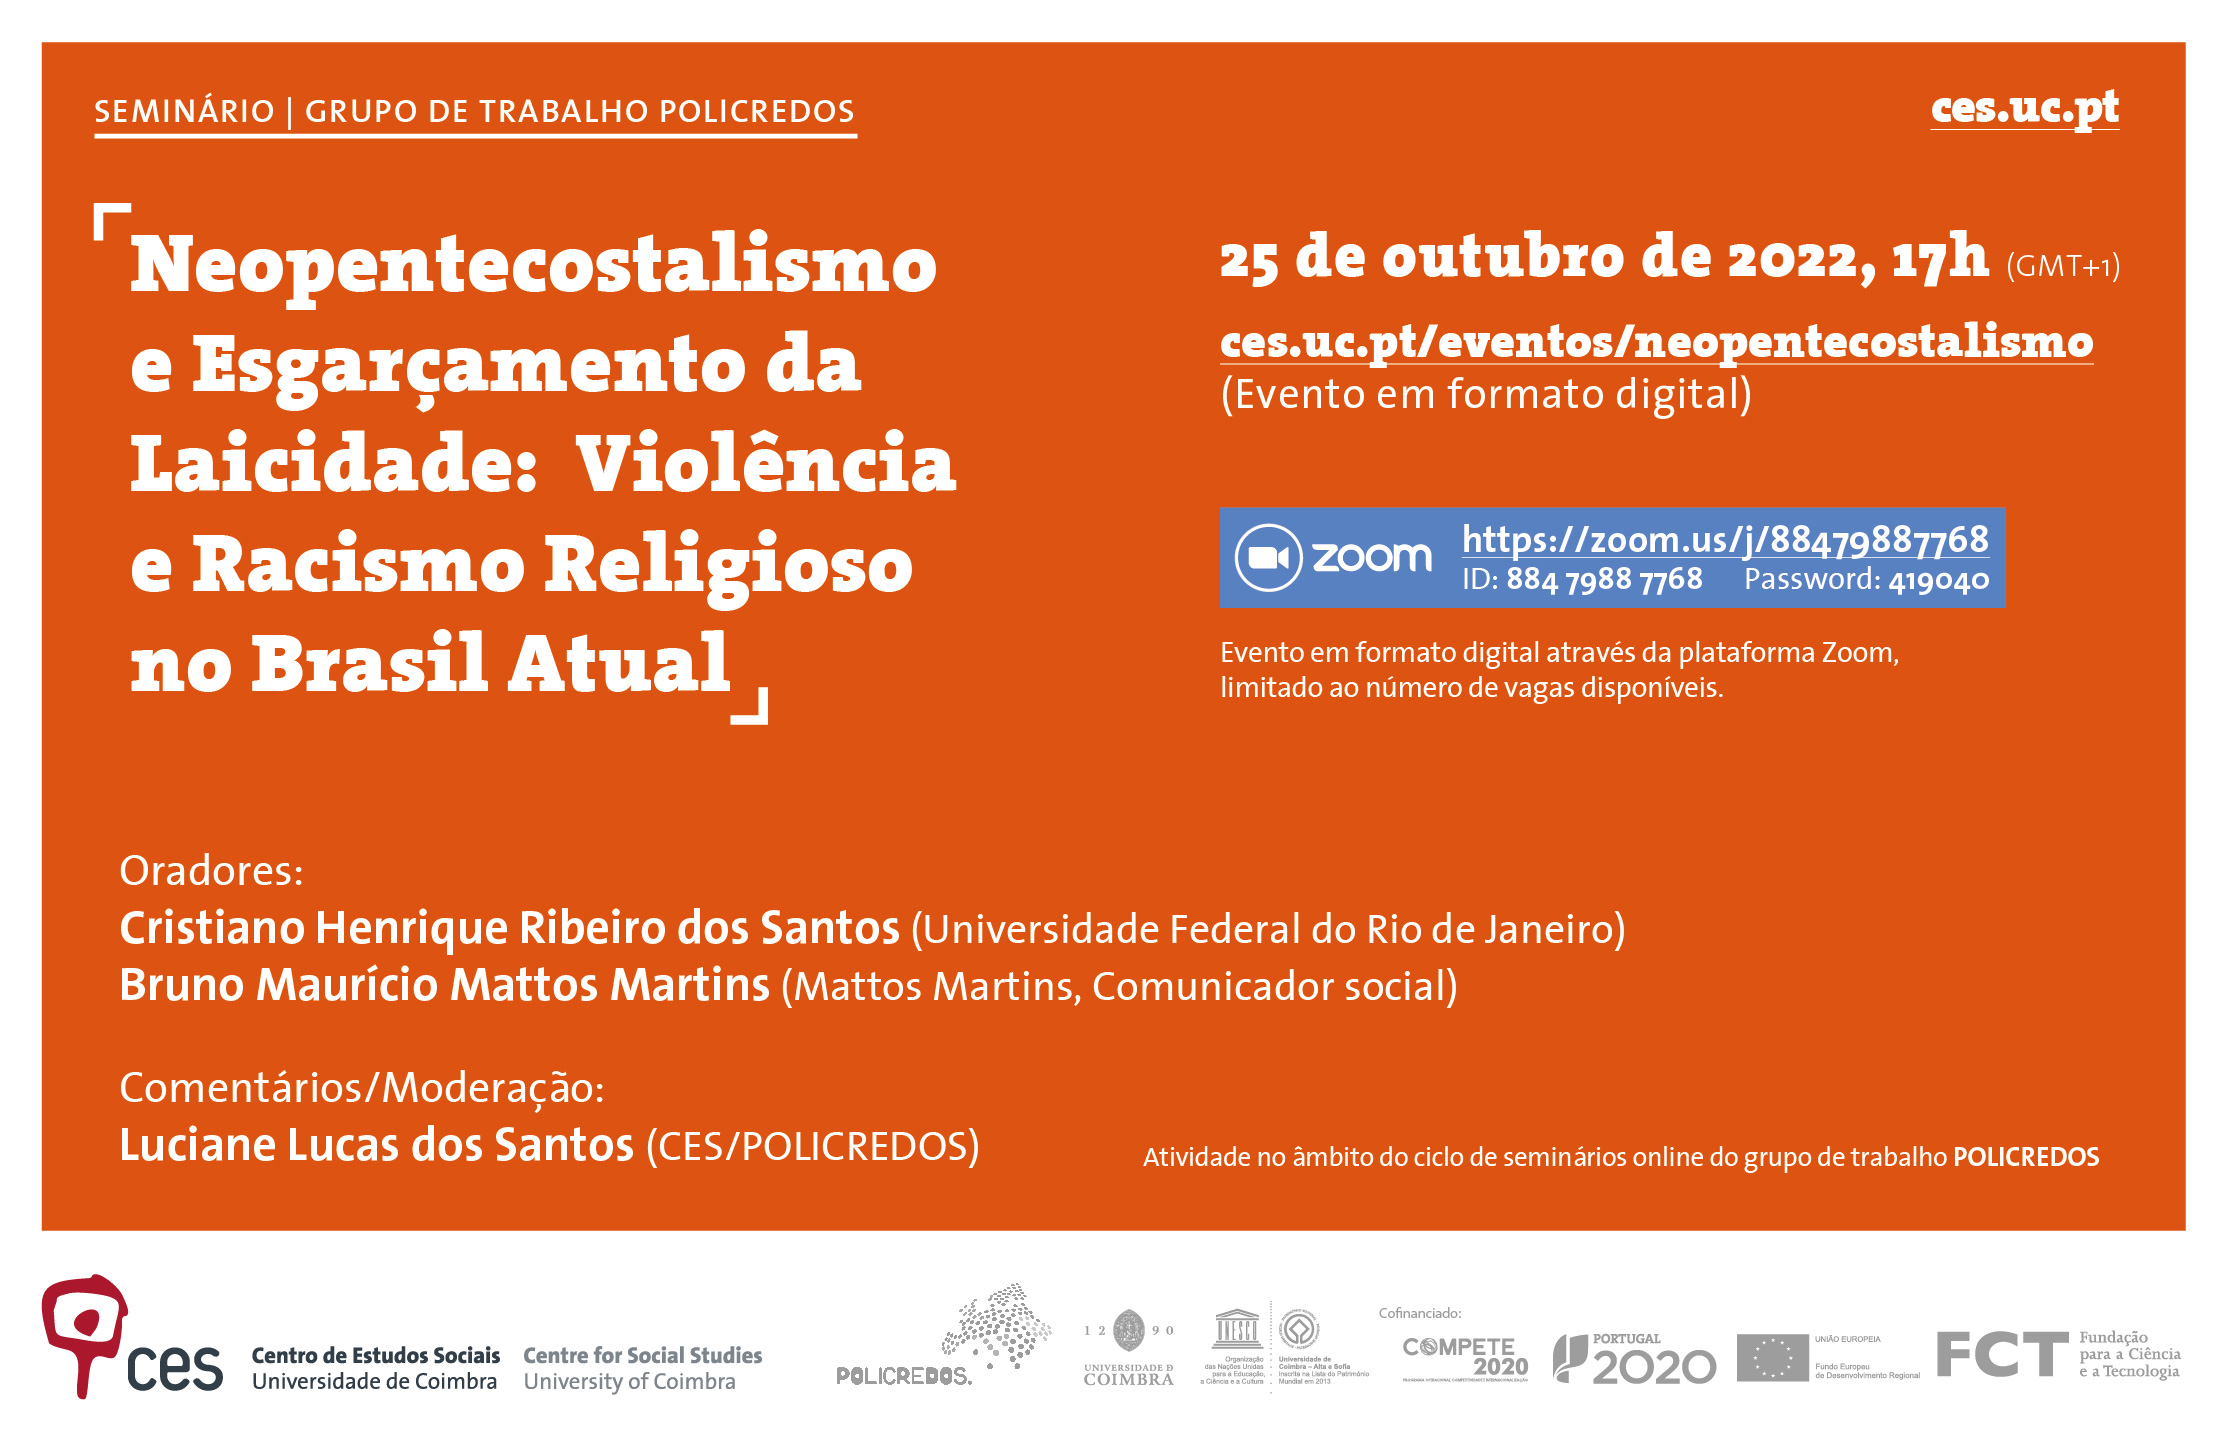 Neo-Pentecostalism and the Fragmentation of Secularism: Violence and Religious Racism in Brazil Today<span id="edit_40734"><script>$(function() { $('#edit_40734').load( "/myces/user/editobj.php?tipo=evento&id=40734" ); });</script></span>